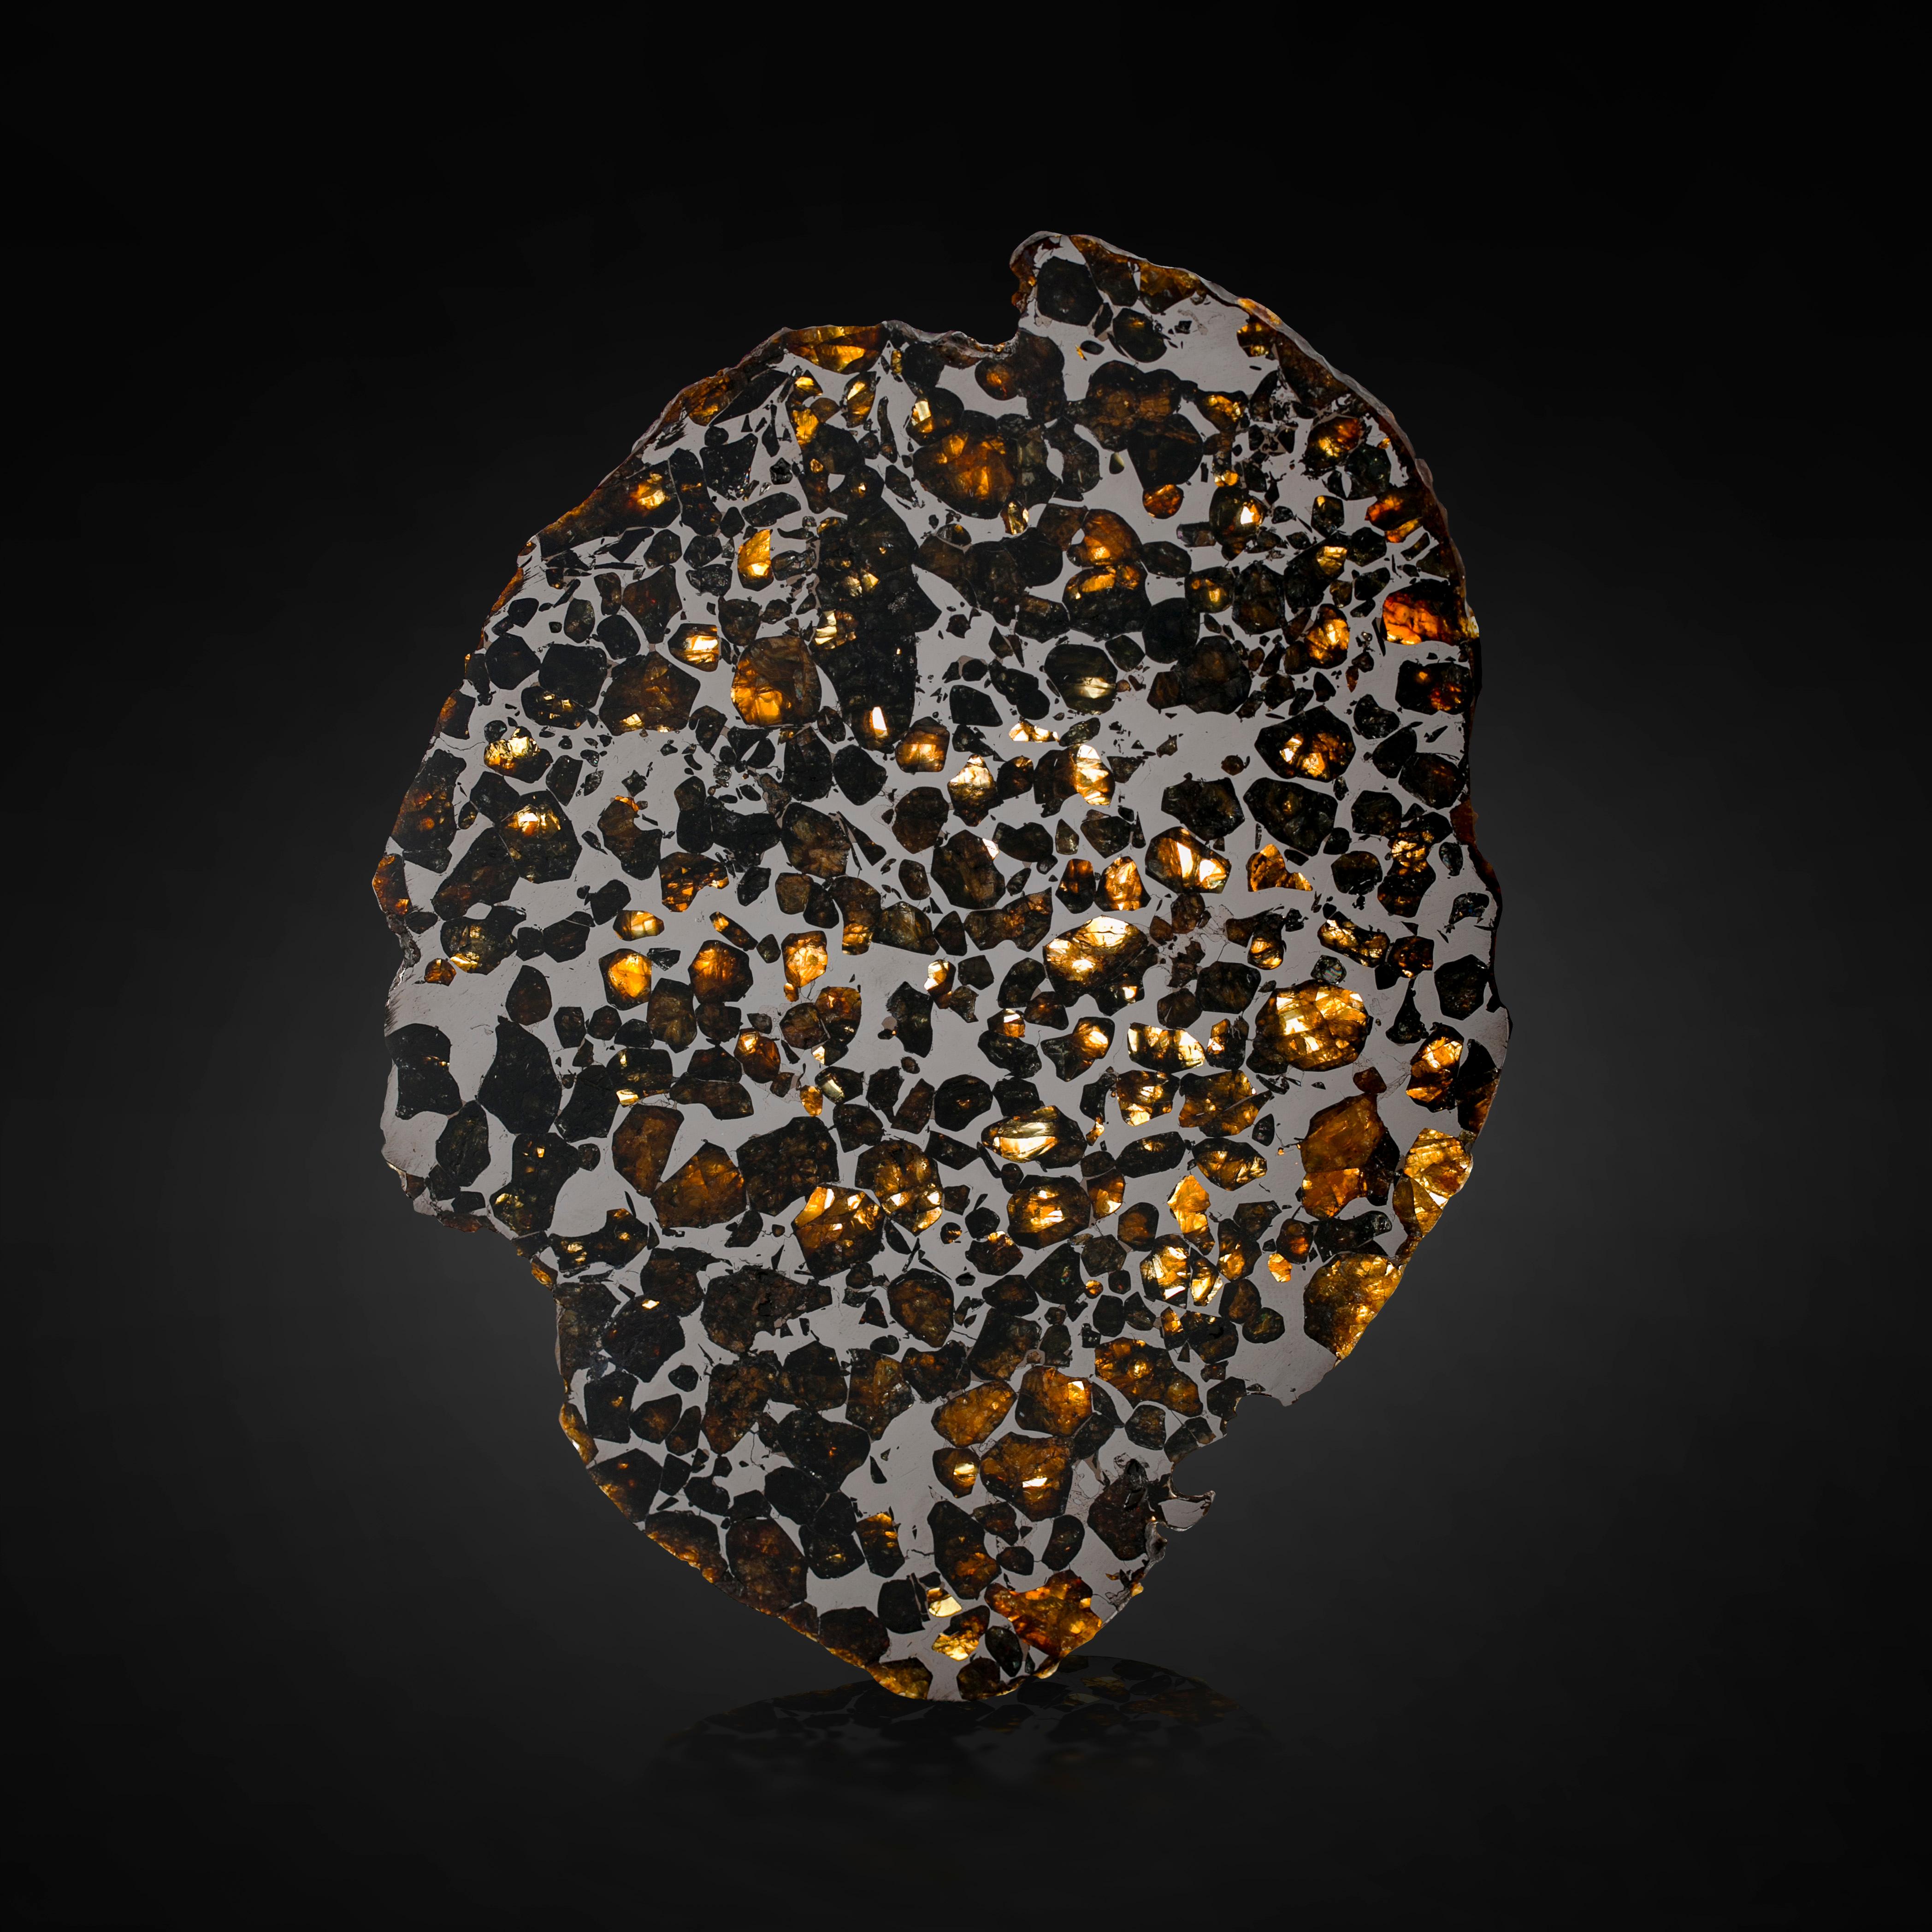 Pallasites are a rare subclass of meteorite that are primarily composed of an iron-nickel matrix (host-rock) and olivine crystals. (Many are familiar with olivine in its gemstone form, peridot.) Only 61 pallasite falls are known to date, with 10